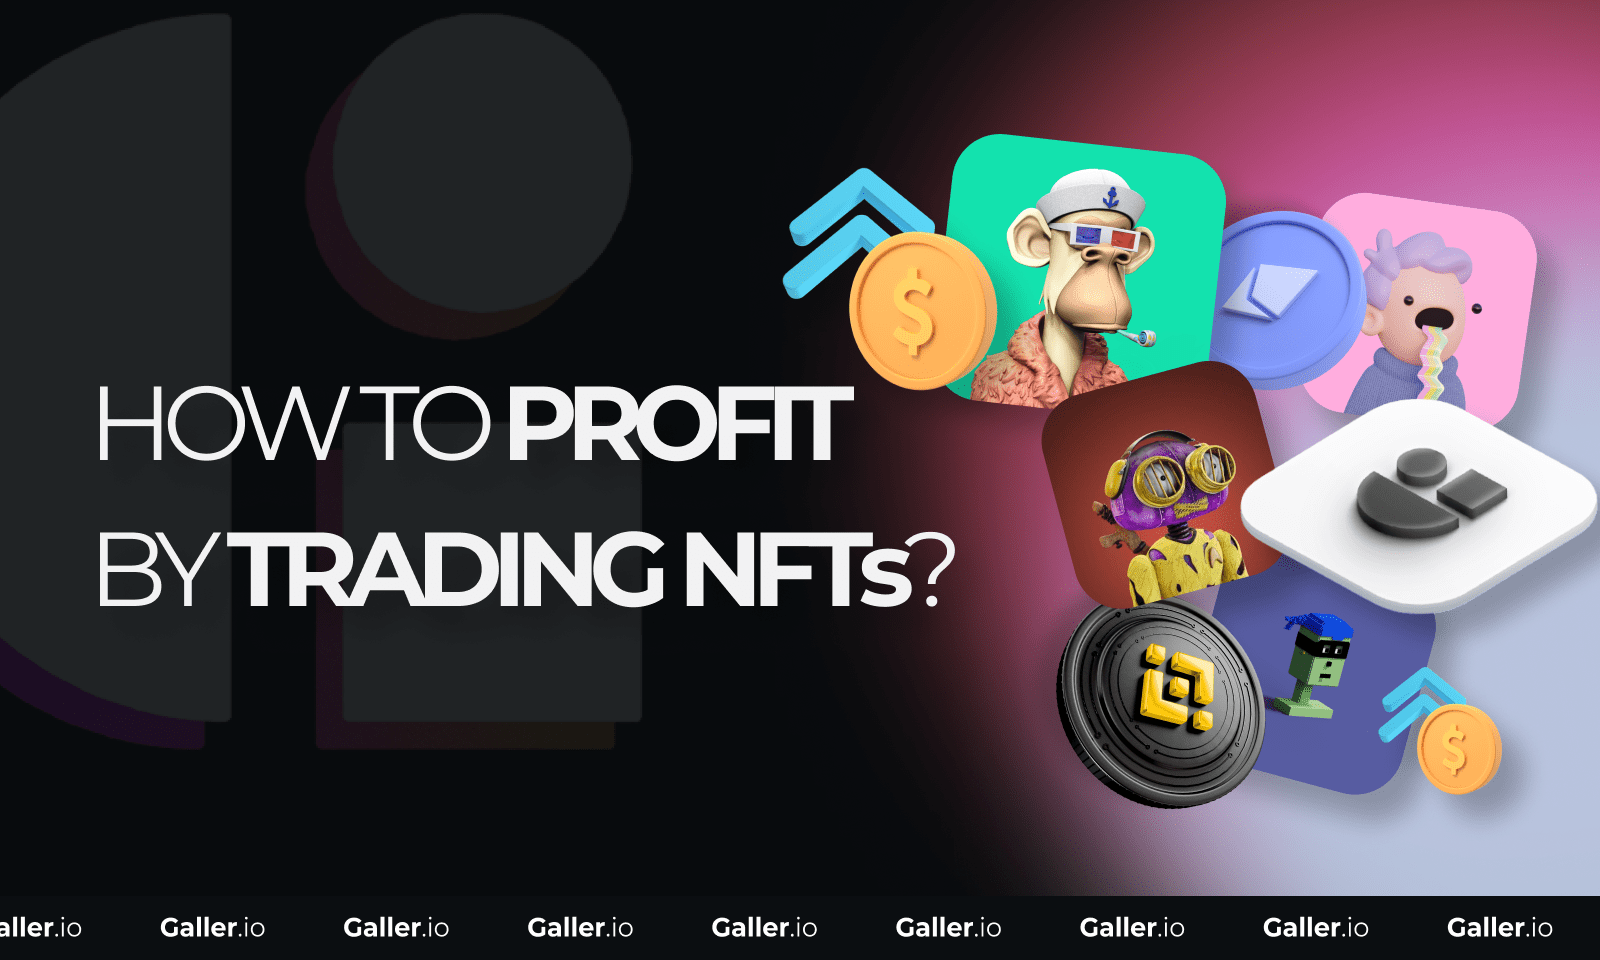 How to Profit by Trading NFTs?